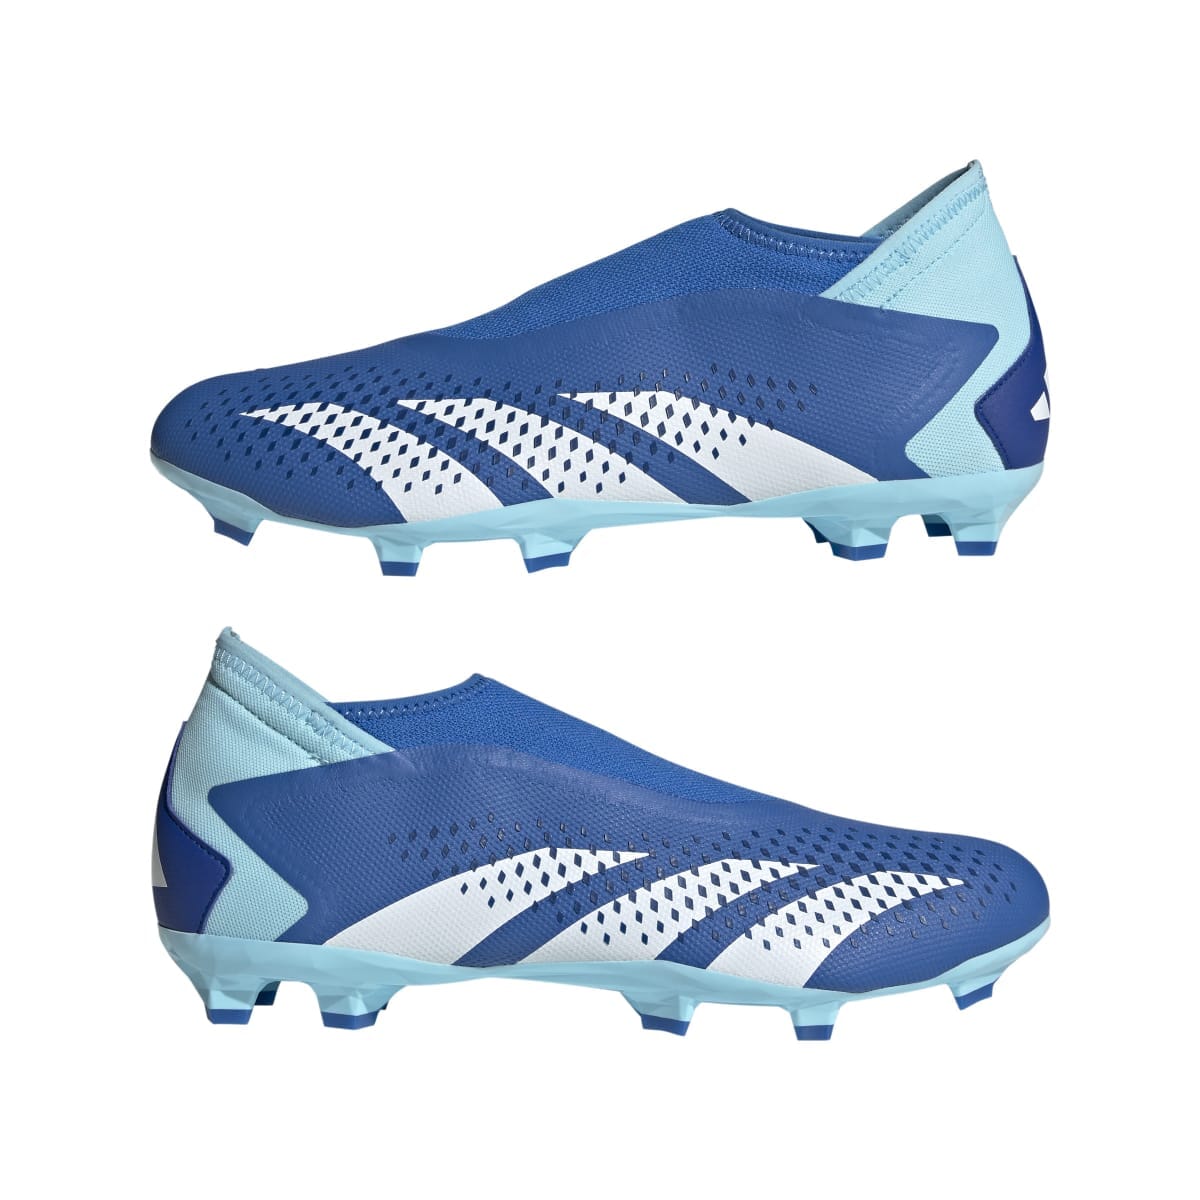 adidas Unisex Predator Accuracy.3 Laceless Firm Ground Soccer Shoes | GZ0019 Soccer Shoes Adidas 